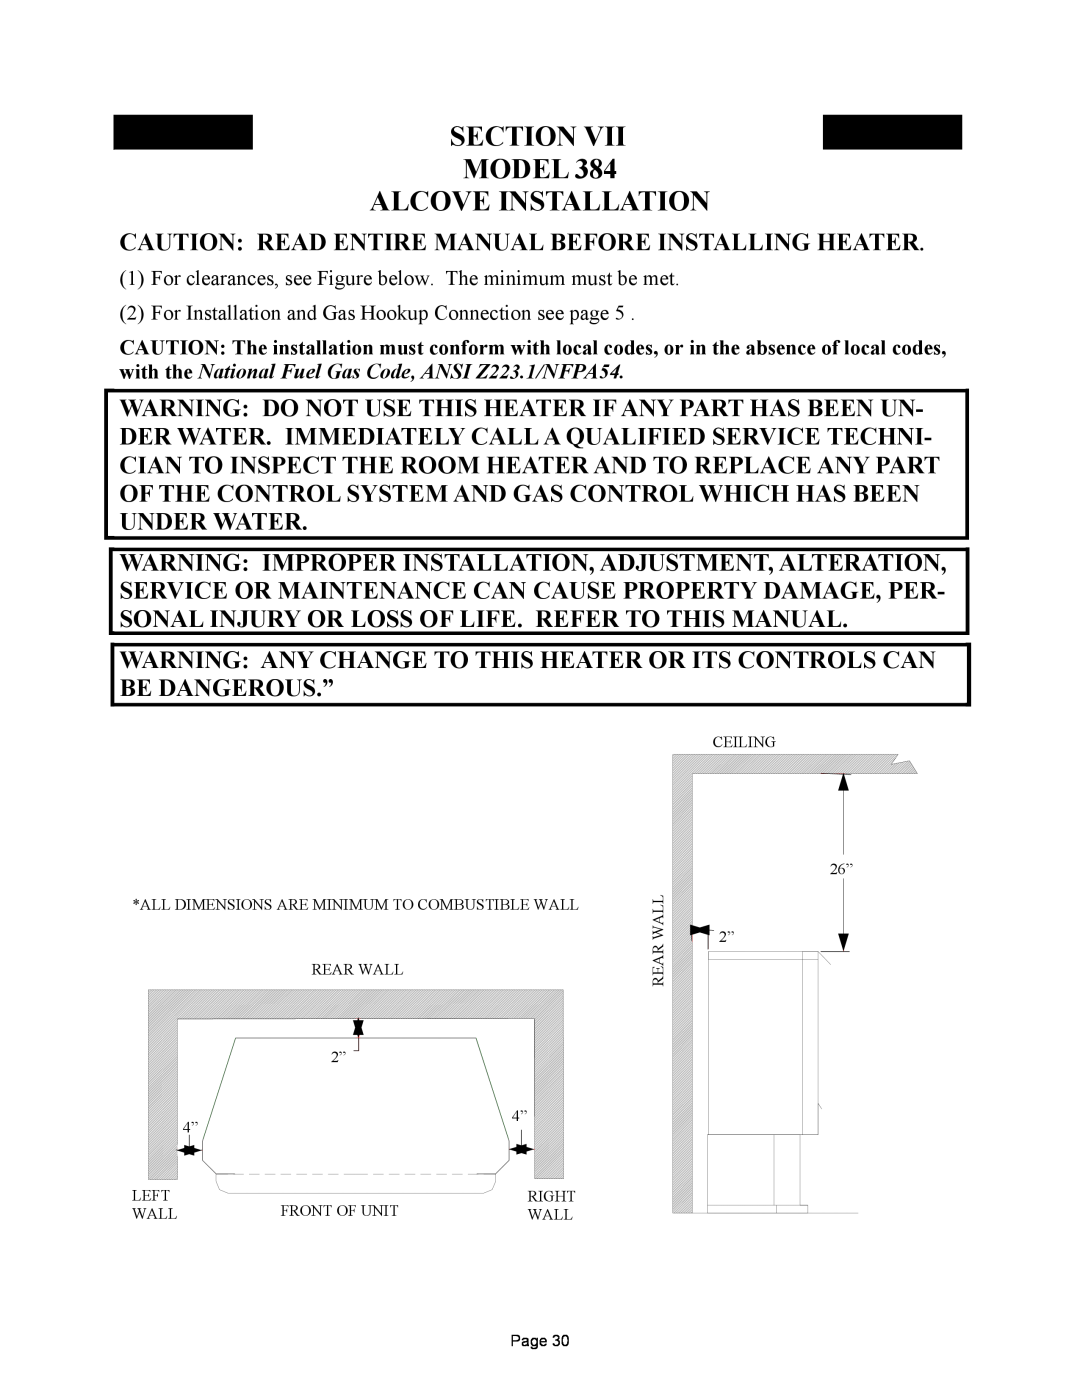 New Buck Corporation 384 manual Section Model Alcove Installation, Caution Read Entire Manual Before Installing Heater 